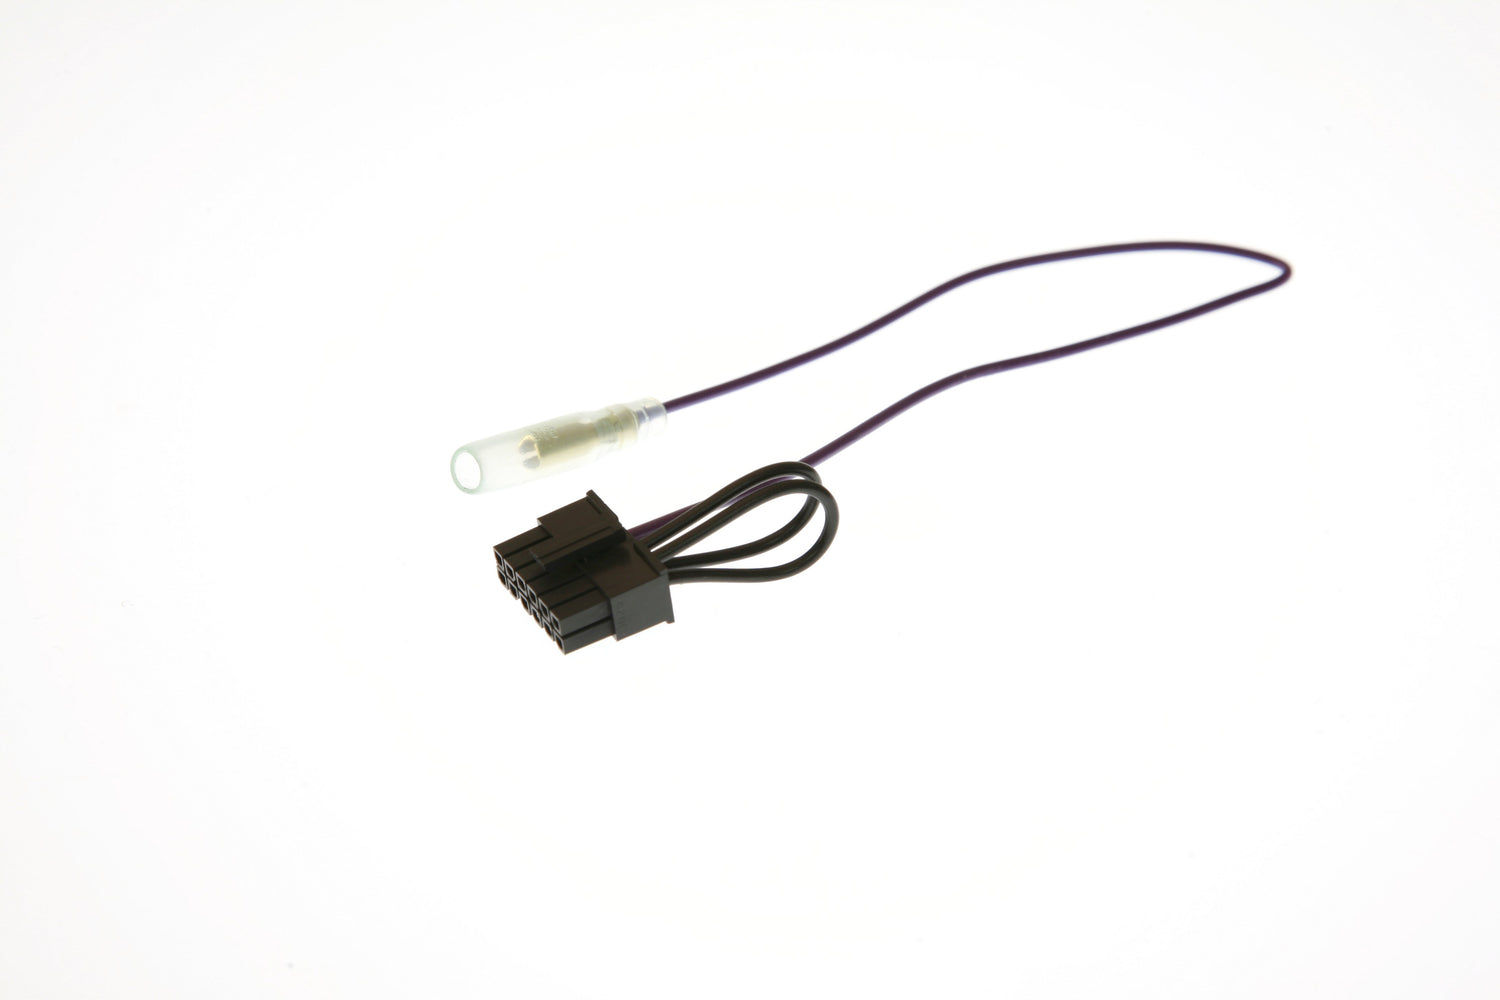 Aerpro APKWPL Kenwood Patch Lead for Control Harness C